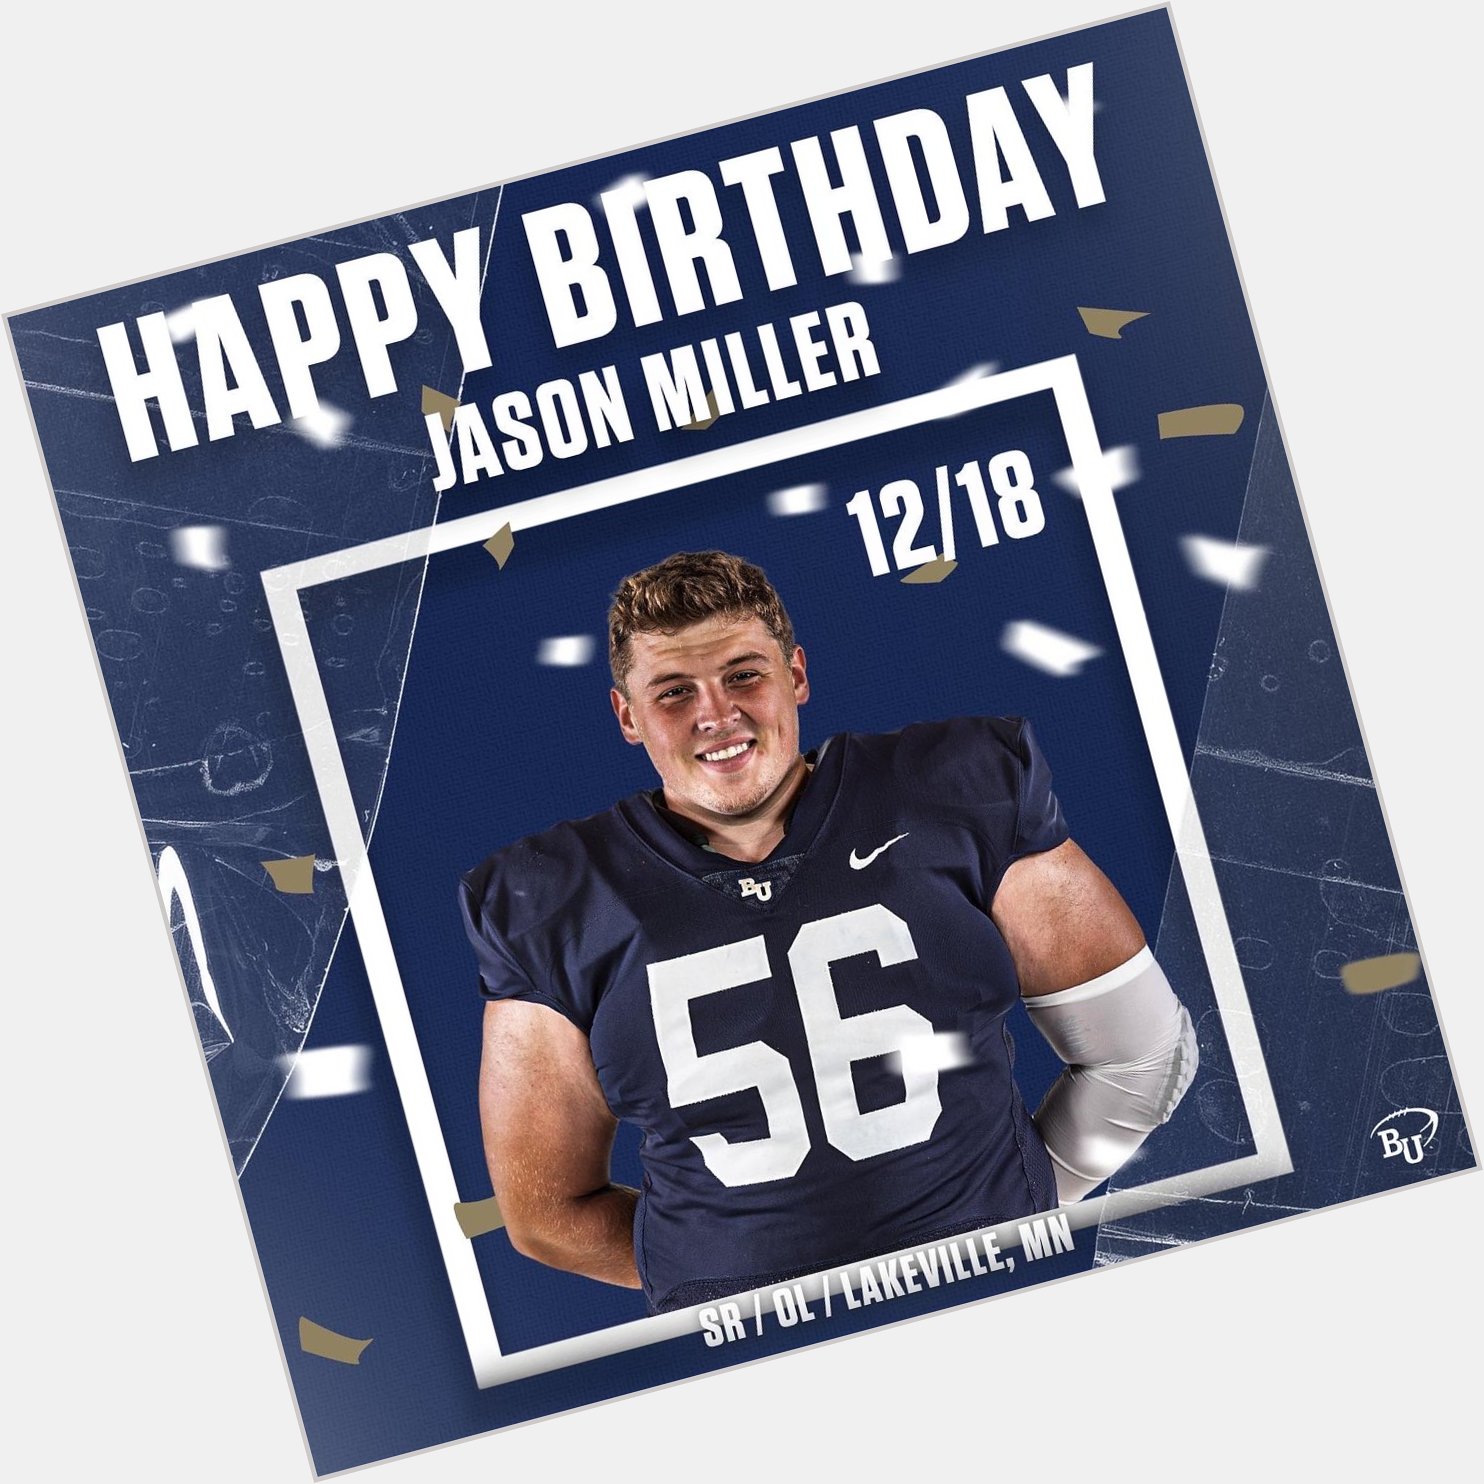 Happy Birthday to Jason Miller today and Isaac Call tomorrow!!  